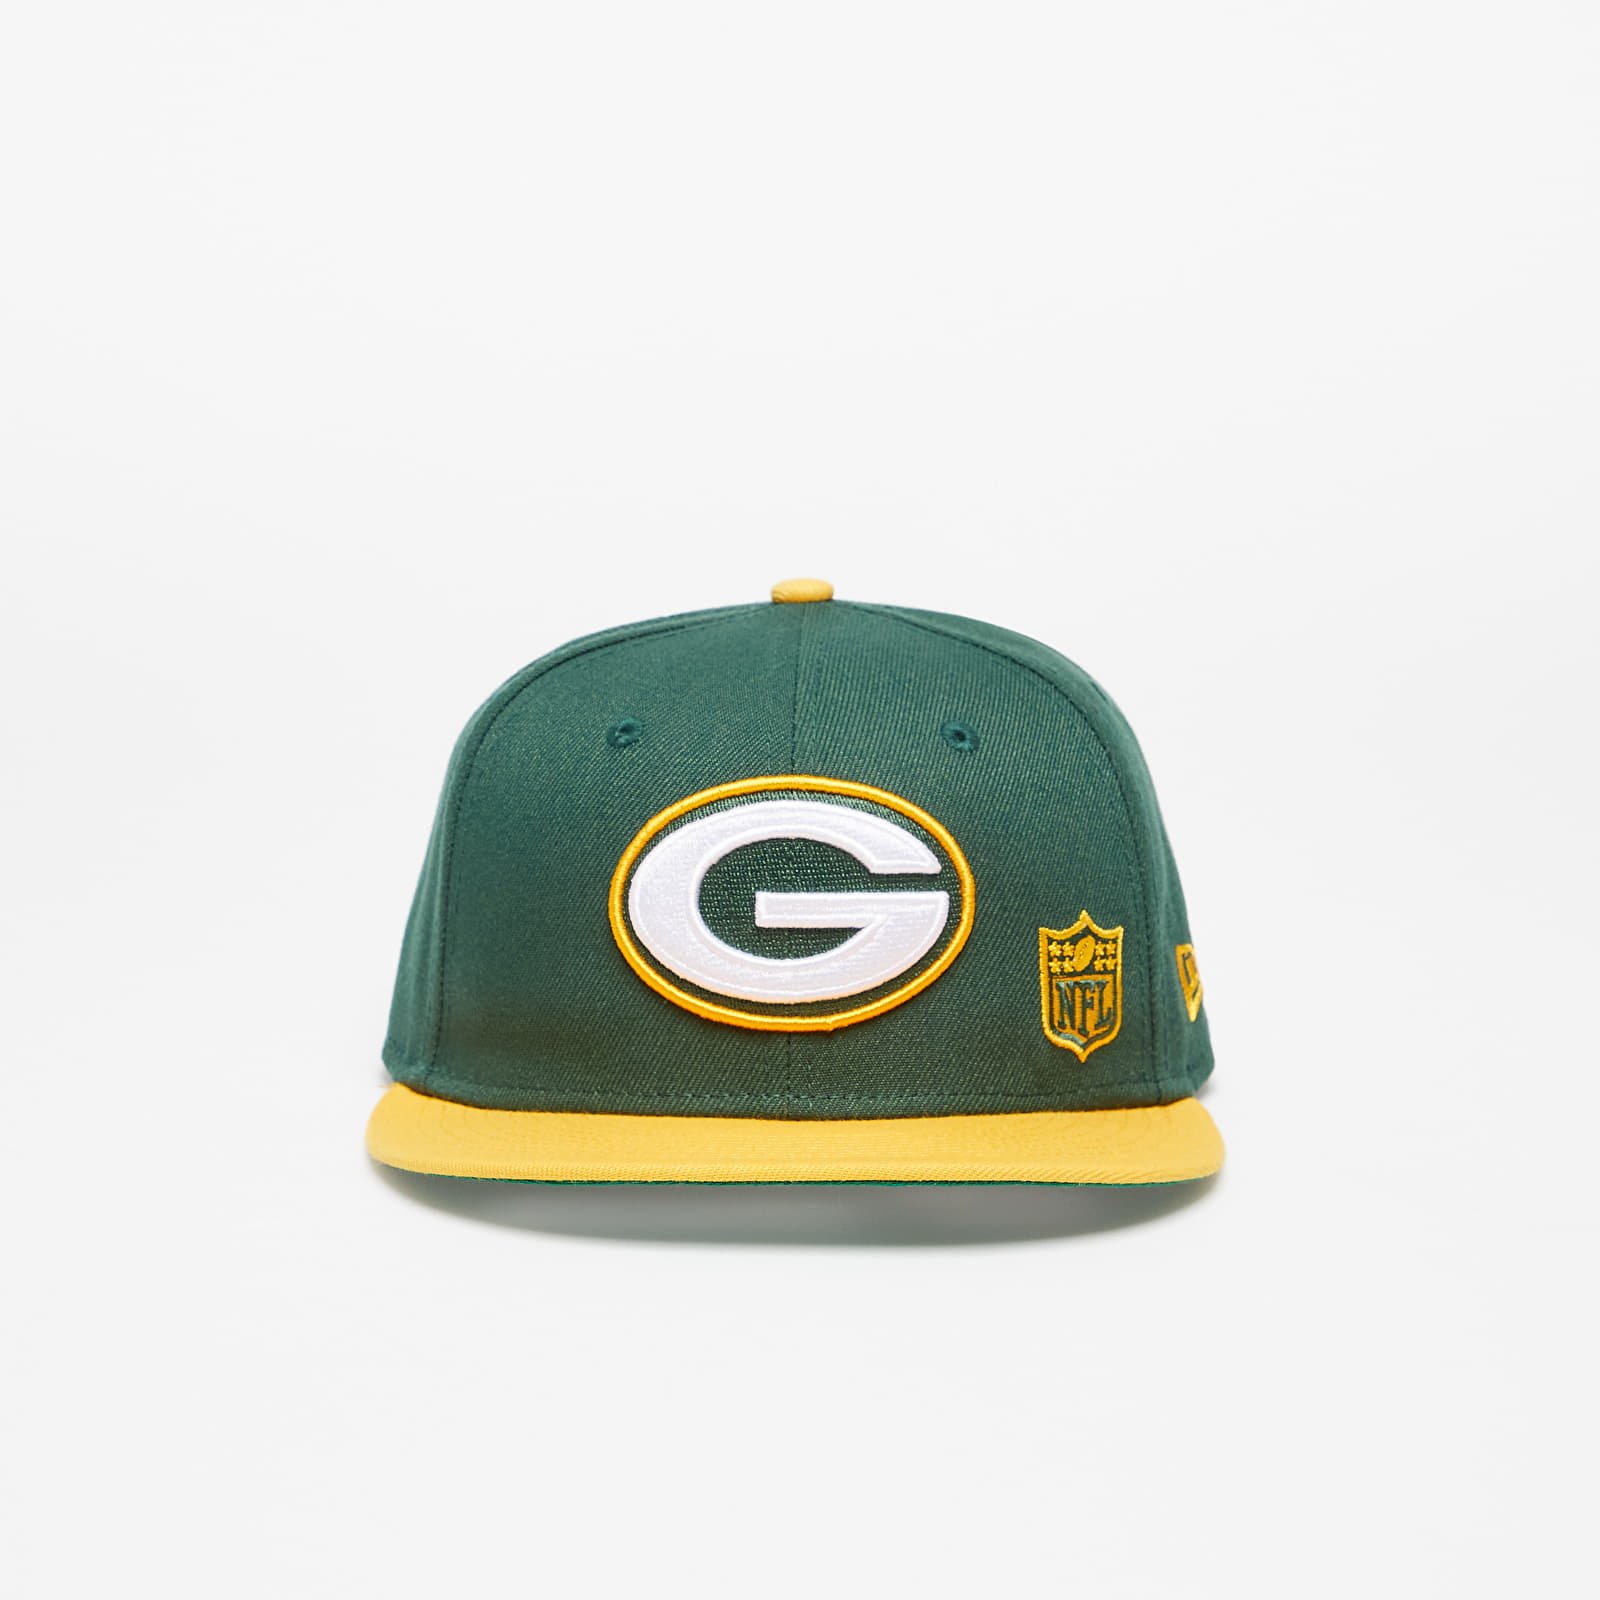 Caps New Era Green Bay Packers Team Arch 9FIFTY Snapback Cap Green/ Yellow